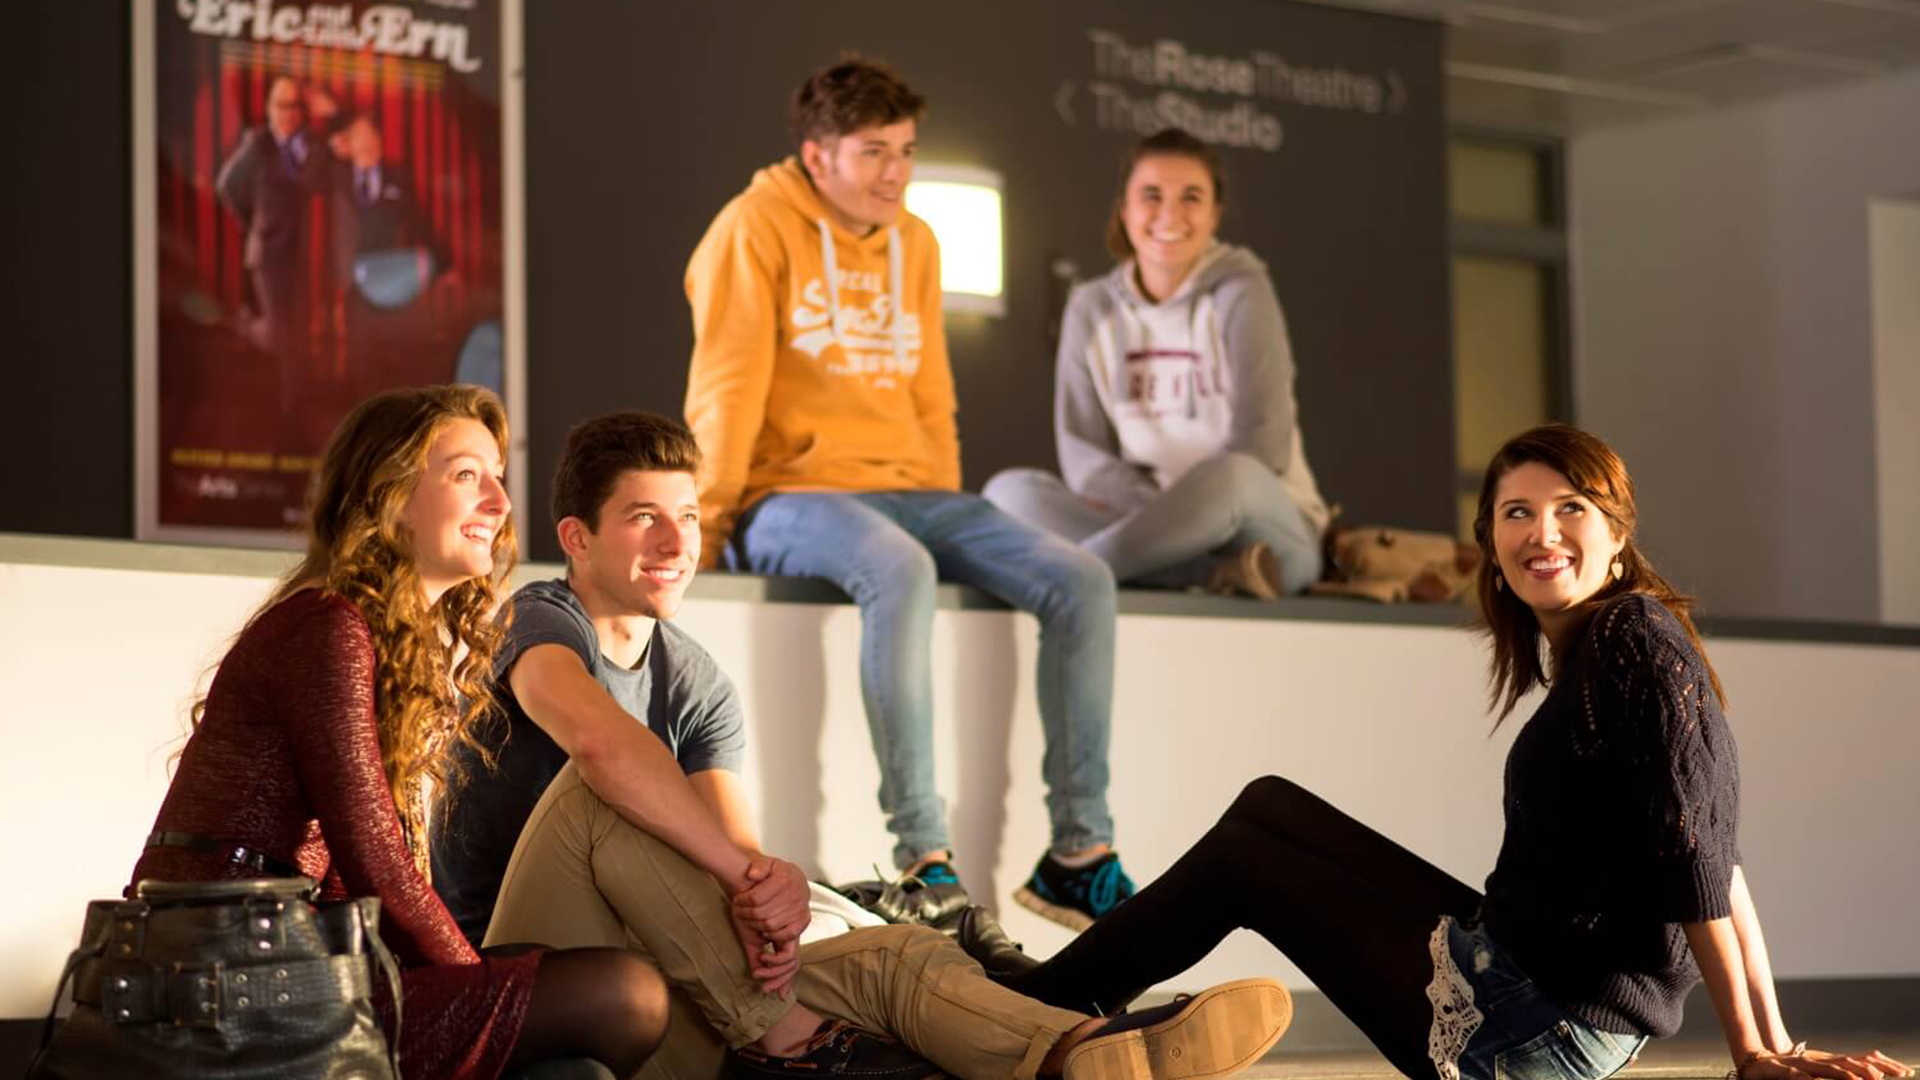 Three students sit on the floor in the Arts Centre while another two sit behind them on a low wall.